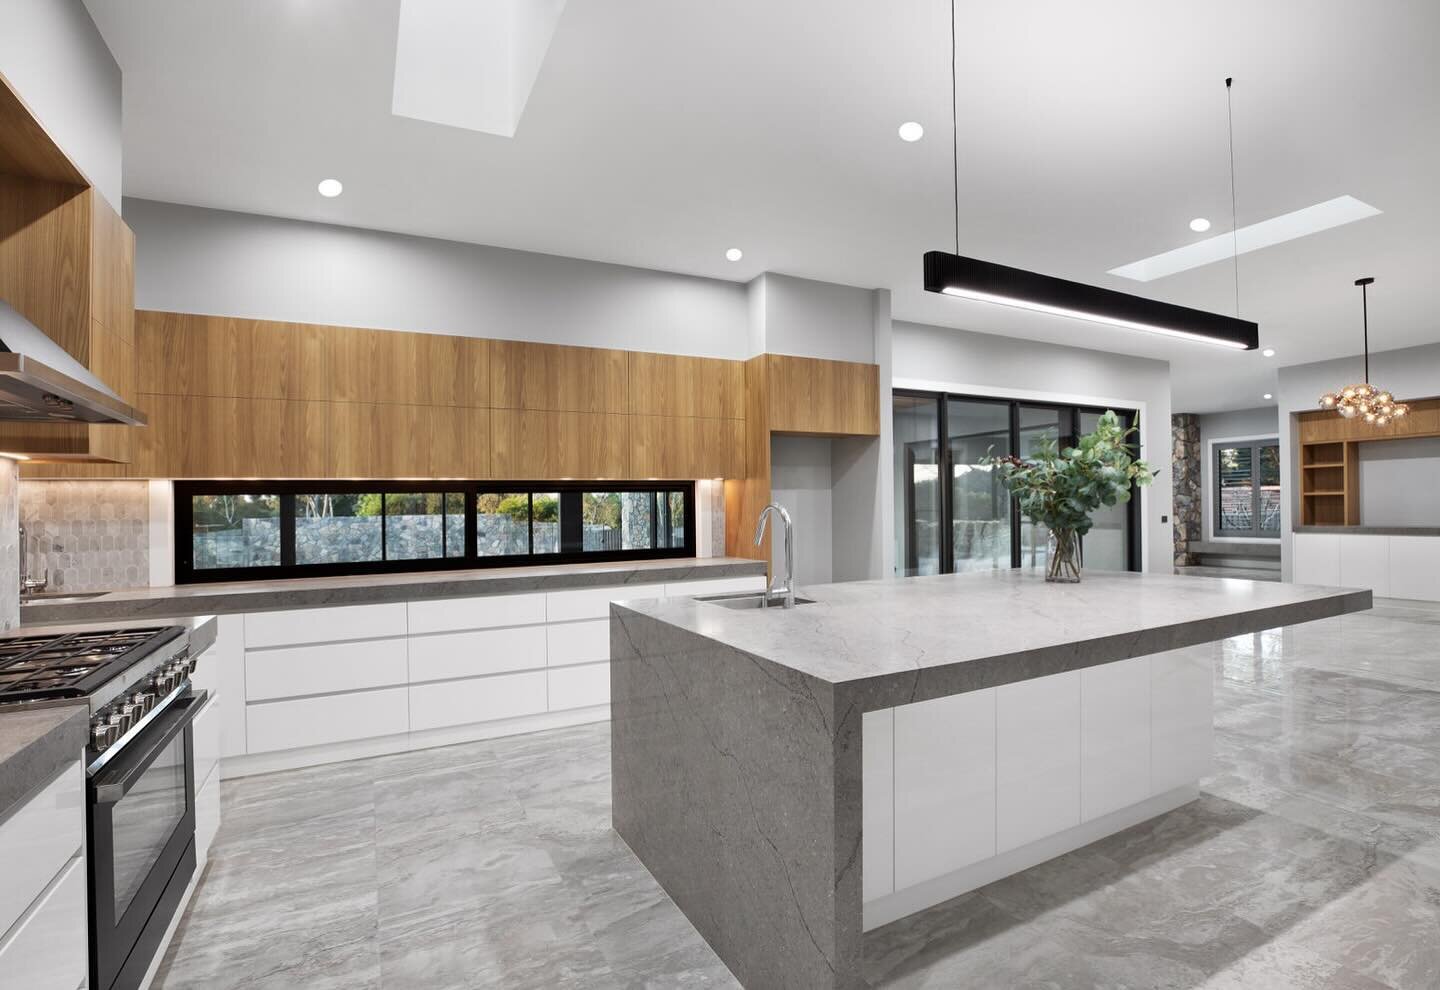 The perfect entertainers kitchen: grand in proportion, finish and wow factor, with seamless flow to the alfresco and pool beyond. 
.
.
.
#matclair #matclairconstructions #melbournebuilder #architecturalbuilders #newhomeconstruction #architecturalhome